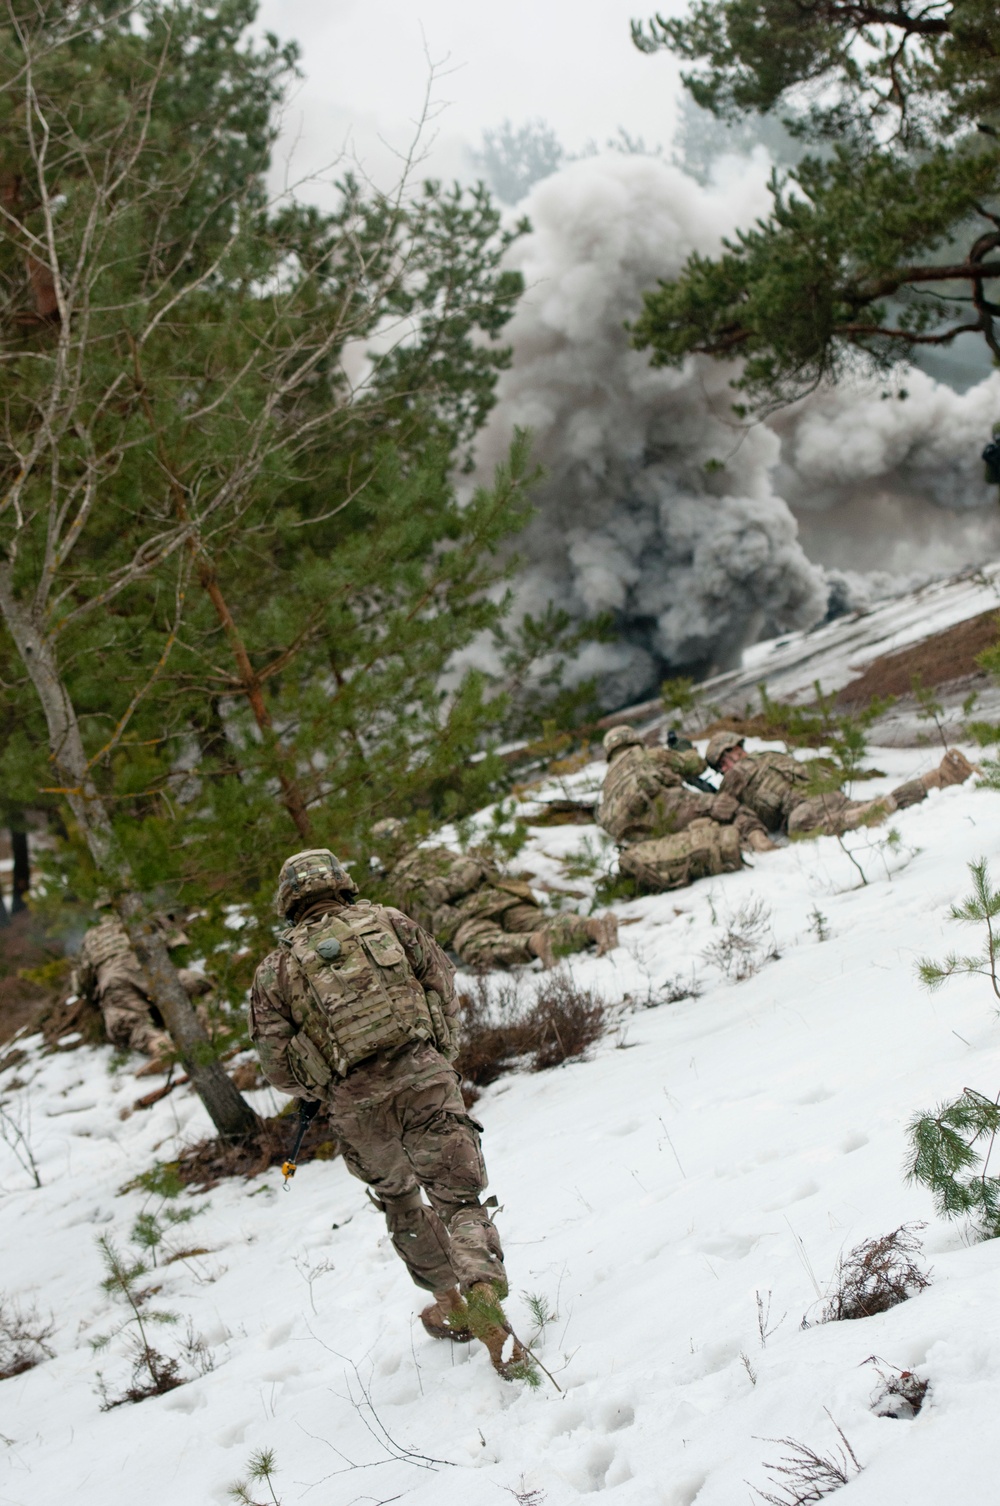 DVIDS Images Operation Atlantic Resolve Lithuania [Image 2 of 4]